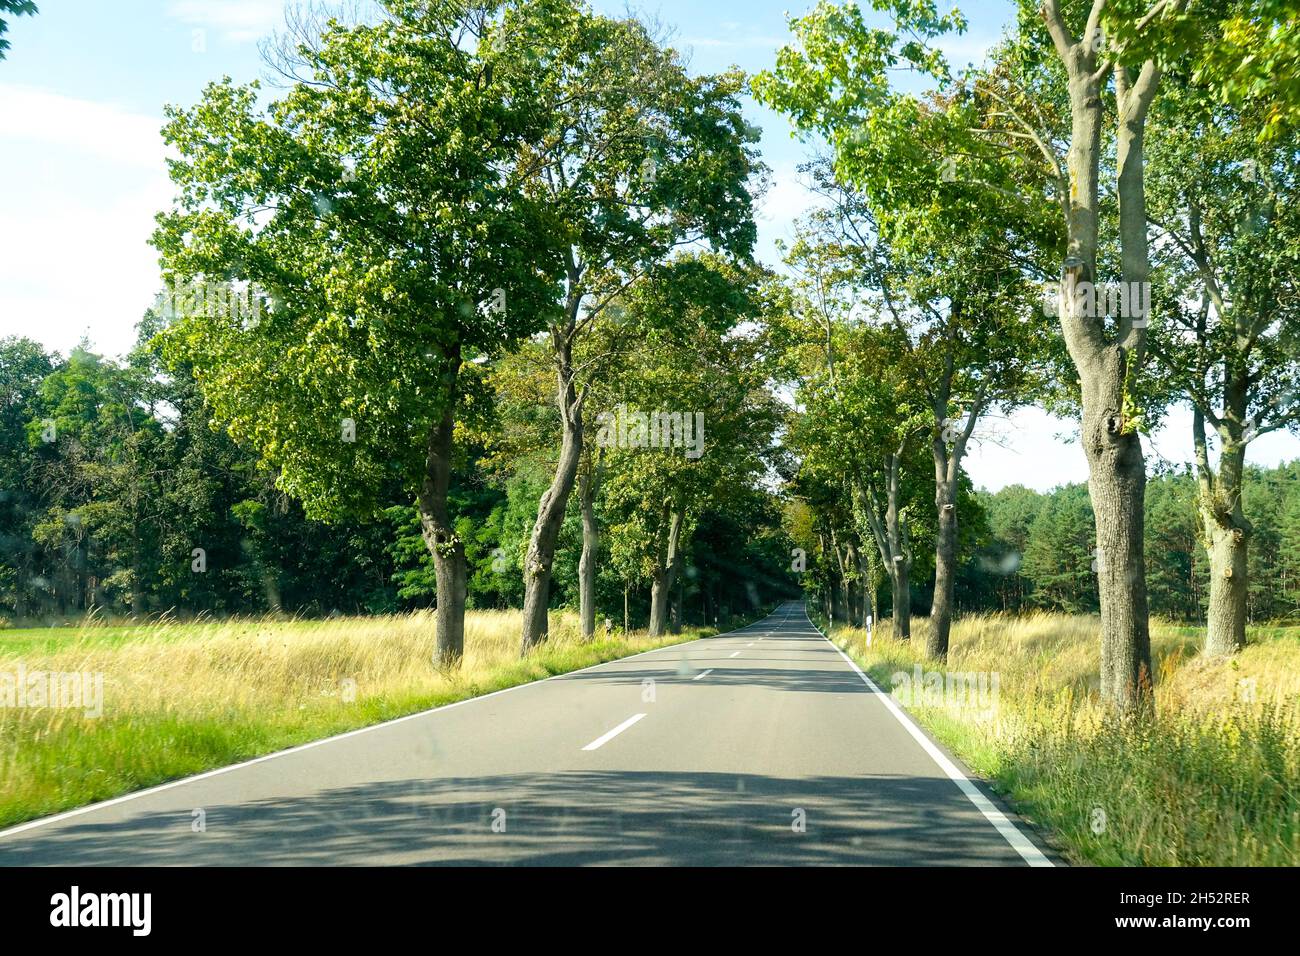 Germany country road trees Stock Photo